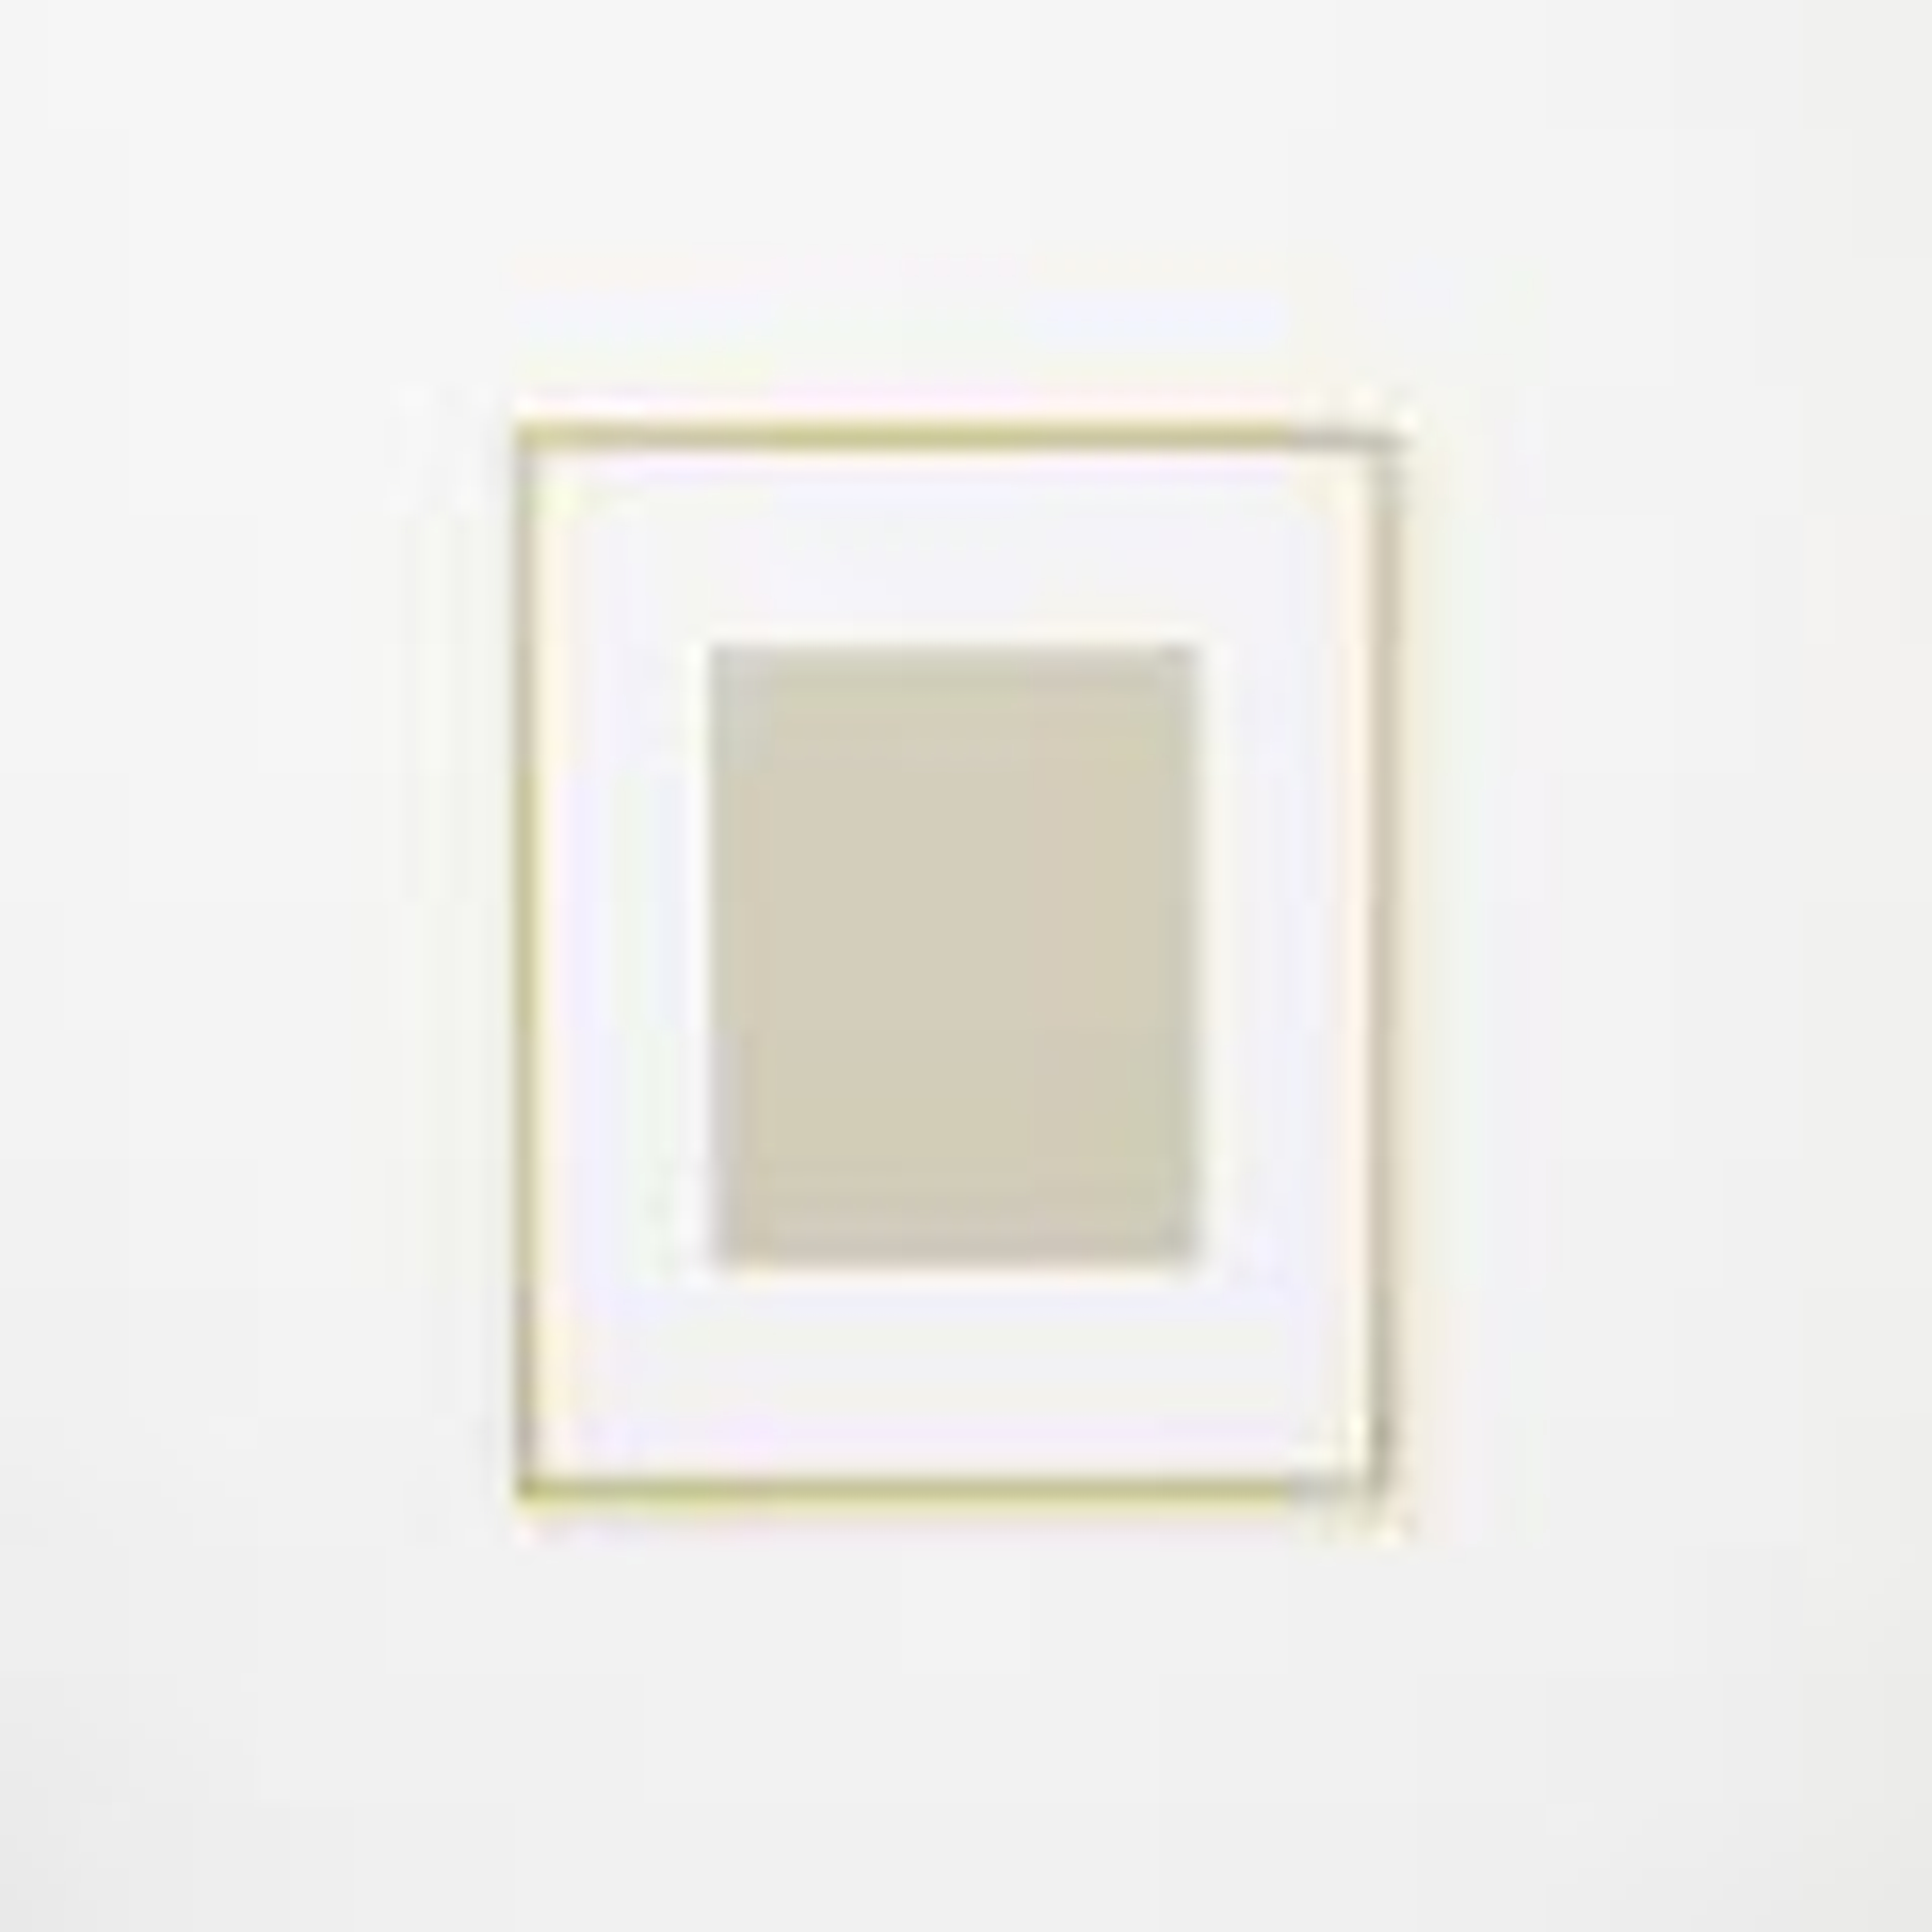 Gallery Frame, Polished Brass, 8" x 10" (13" x 16" without mat) - West Elm